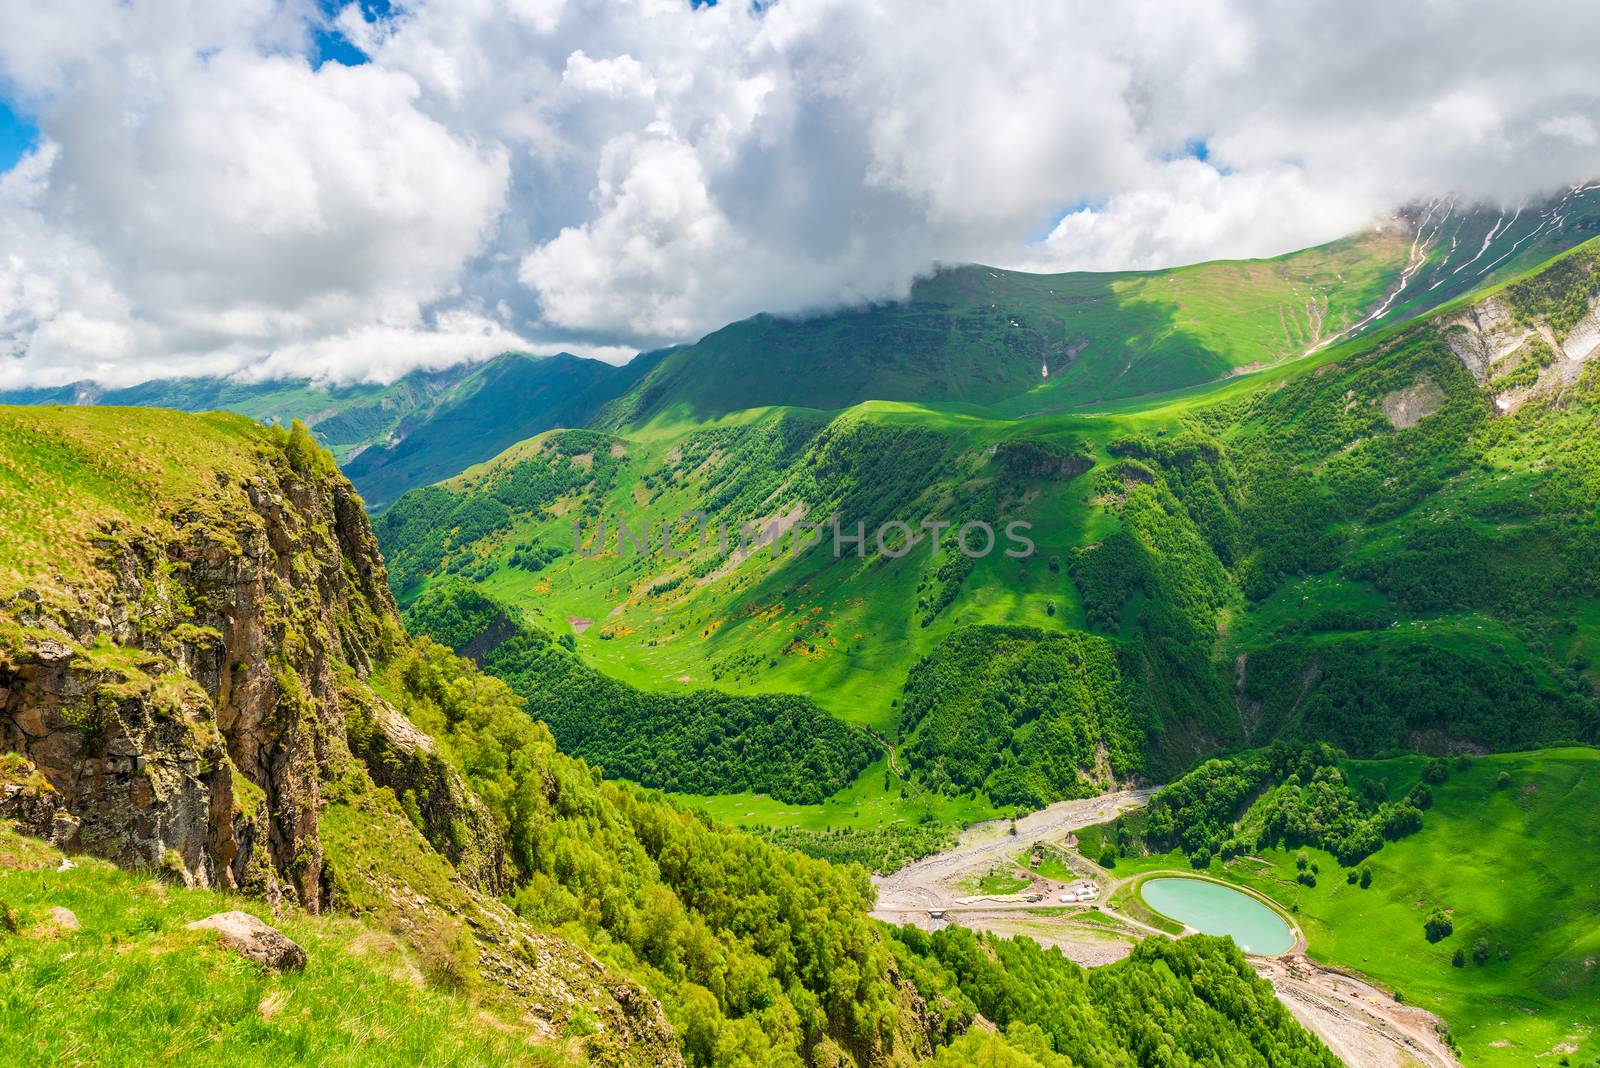 Gorge of the Caucasus scenic mountains, the landscape of Georgia by kosmsos111